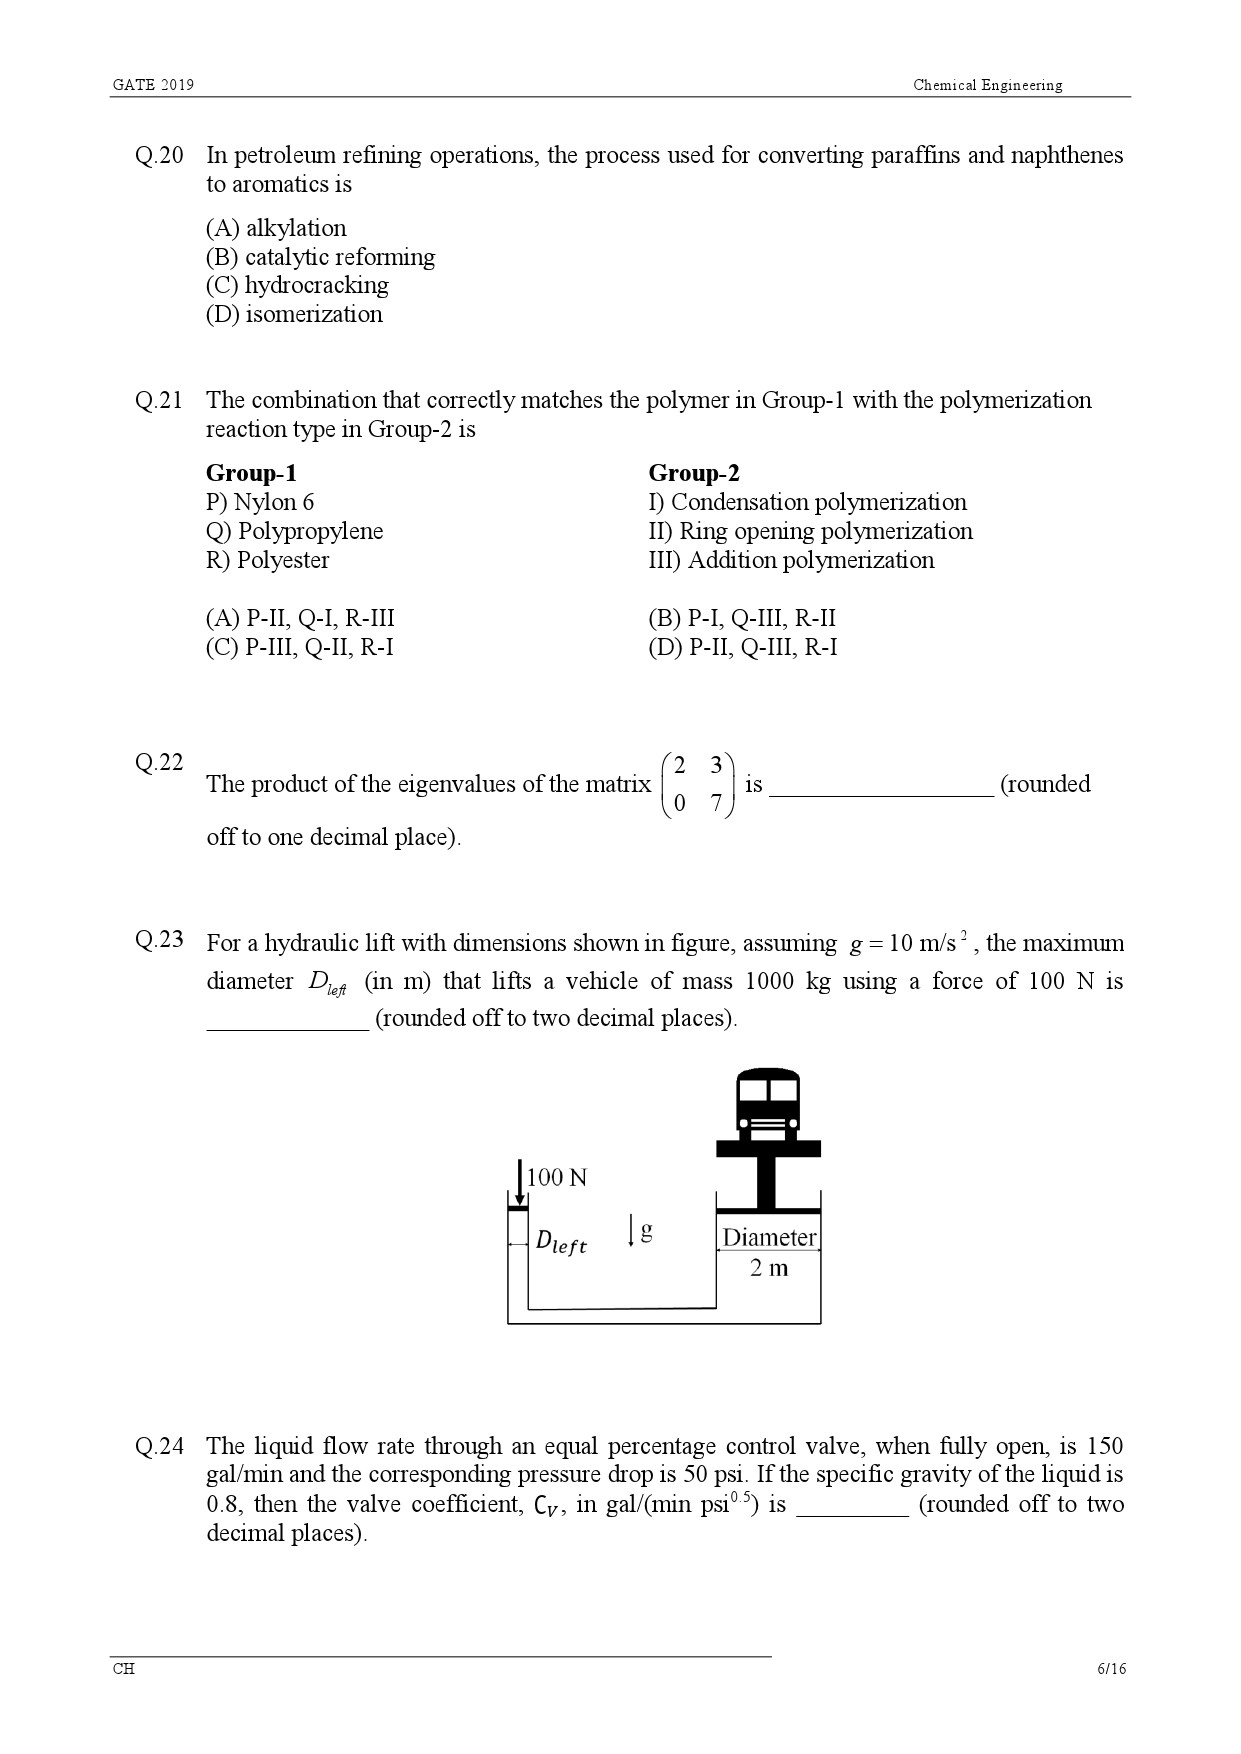 GATE Exam Question Paper 2019 Chemical Engineering 9